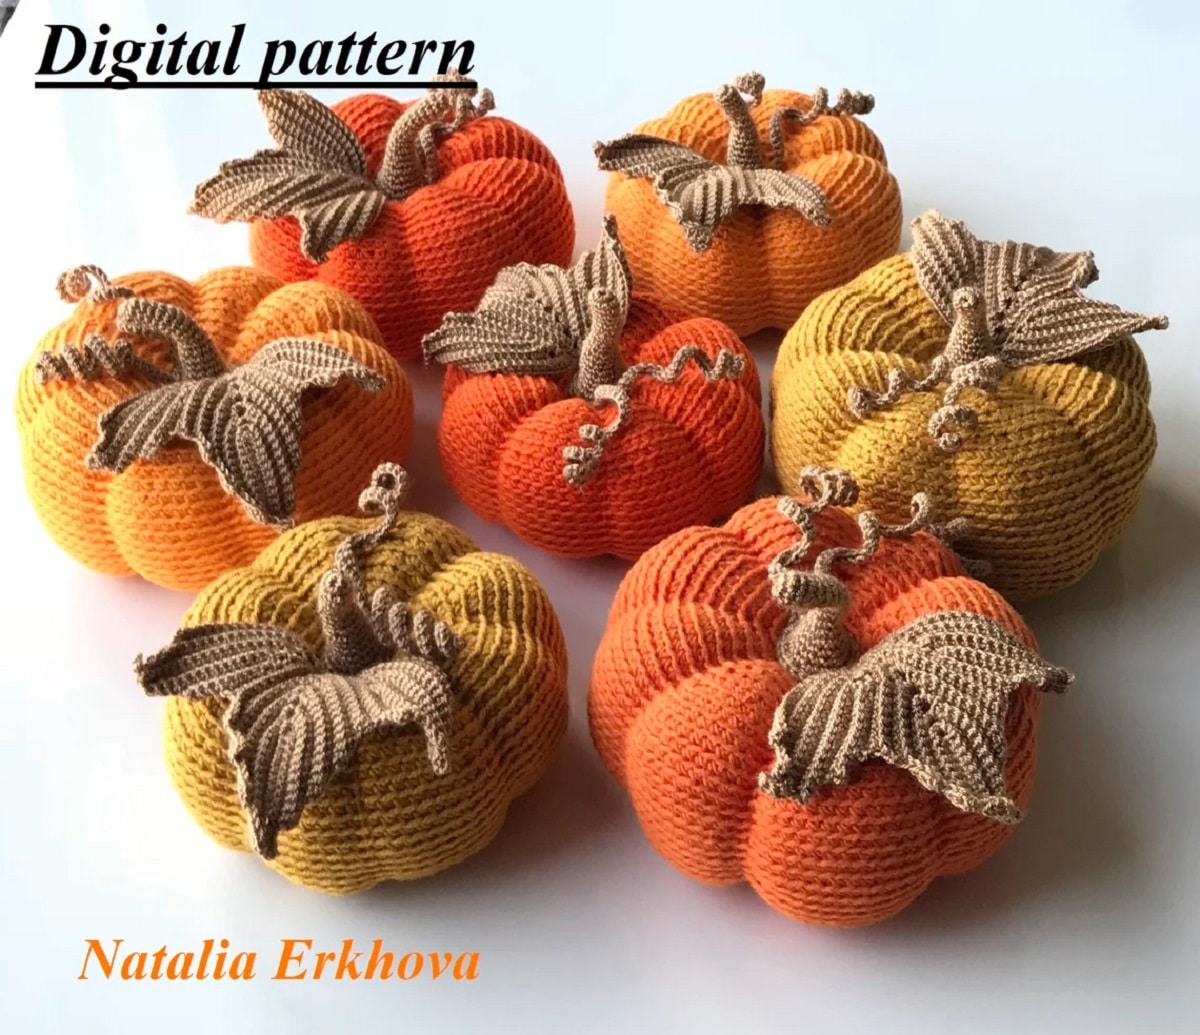 A pile of light and dark orange crochet pumpkins with brown stems in the center and a large brown leaf on each pumpkin.